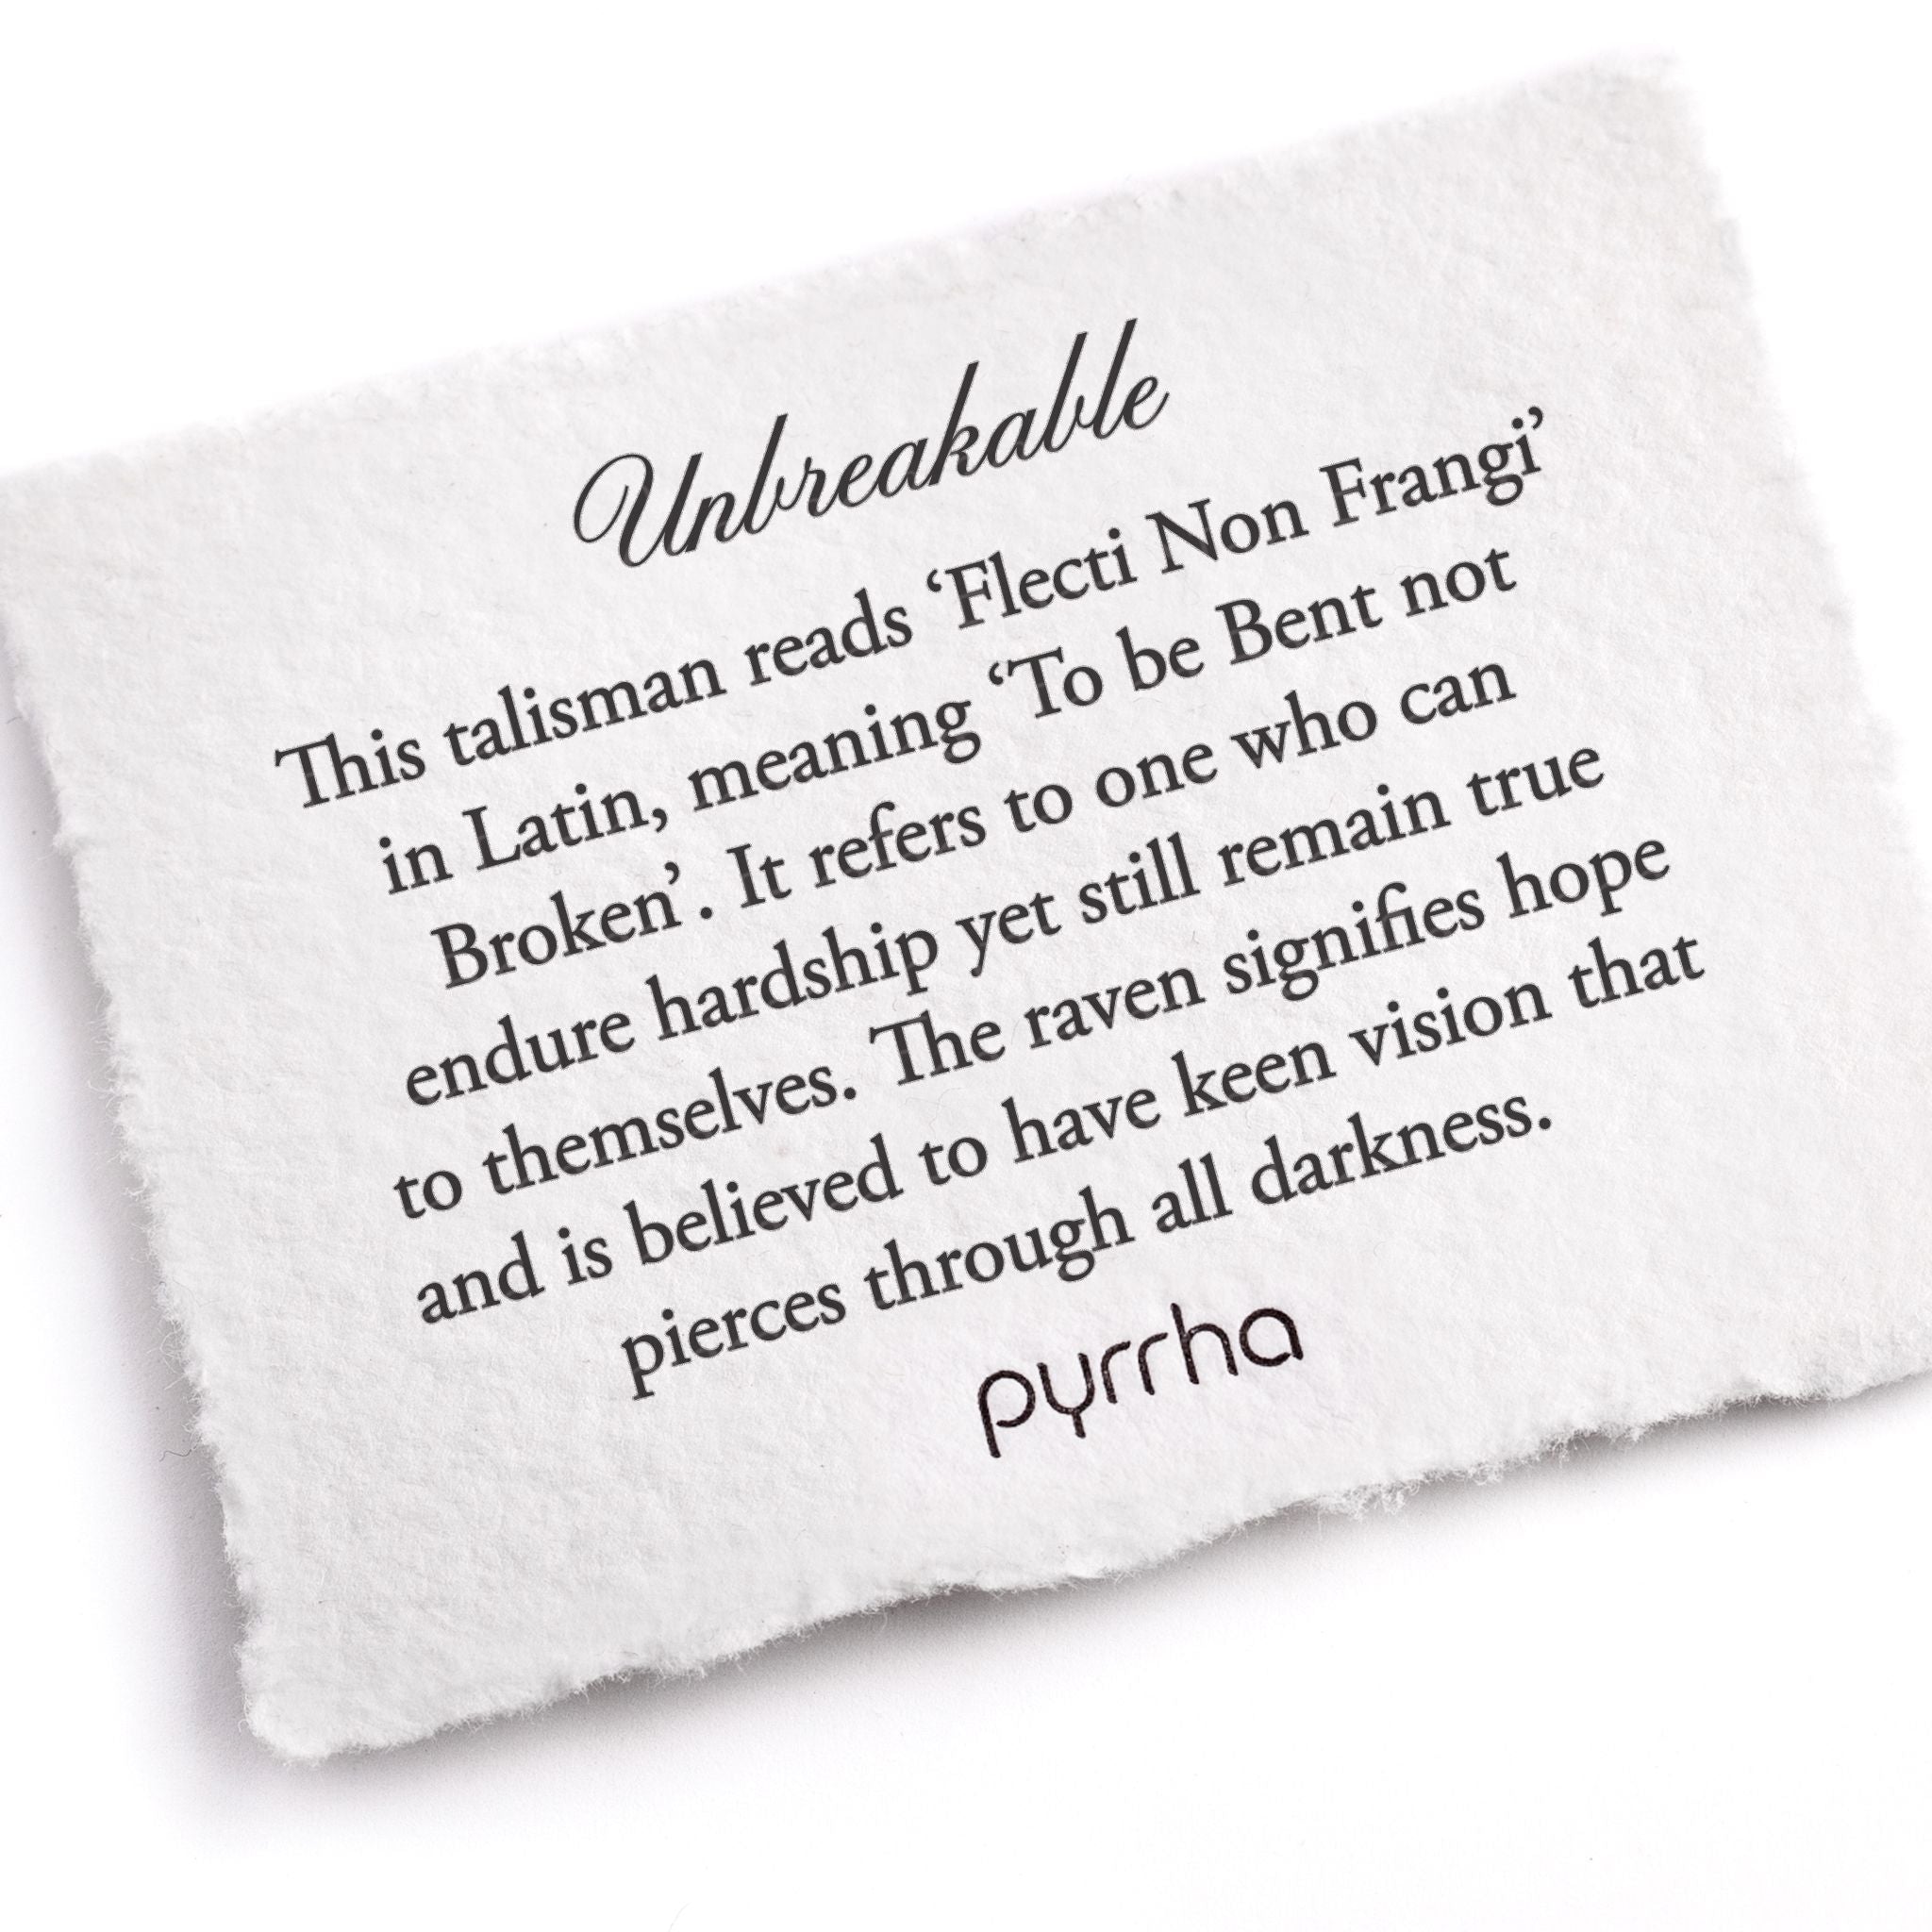 A hand-torn, letterpress printed card describing the meaning for Pyrrha's Unbreakable Talisman Necklace